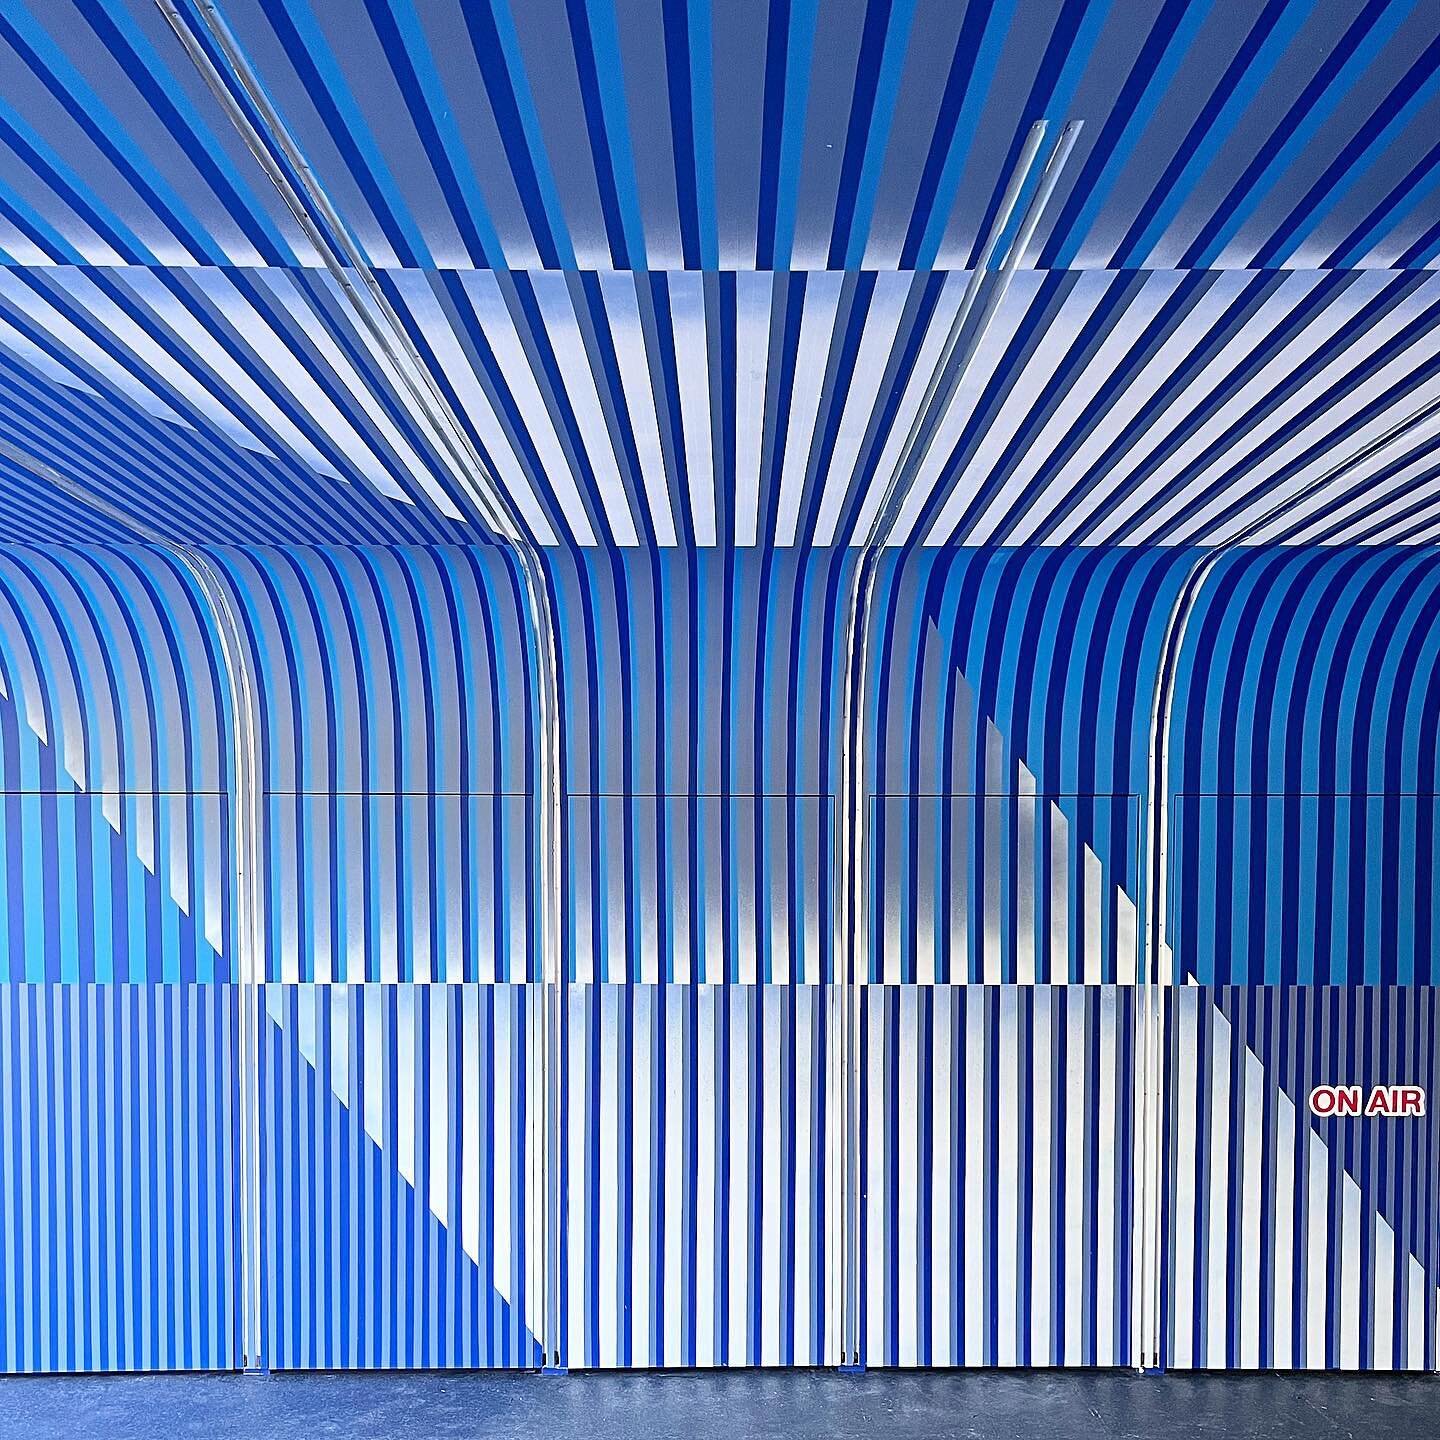 @lx1one  Acrylic paint on wood structure. #comissionwork for @domdeco.creation in #Lansargues #France⬜️⬛️🟦⬜️⬛️🟦#opticalart#abstractart#geometricart#architecture#decoration#blue#lines#montpellier#lxone#aocallday